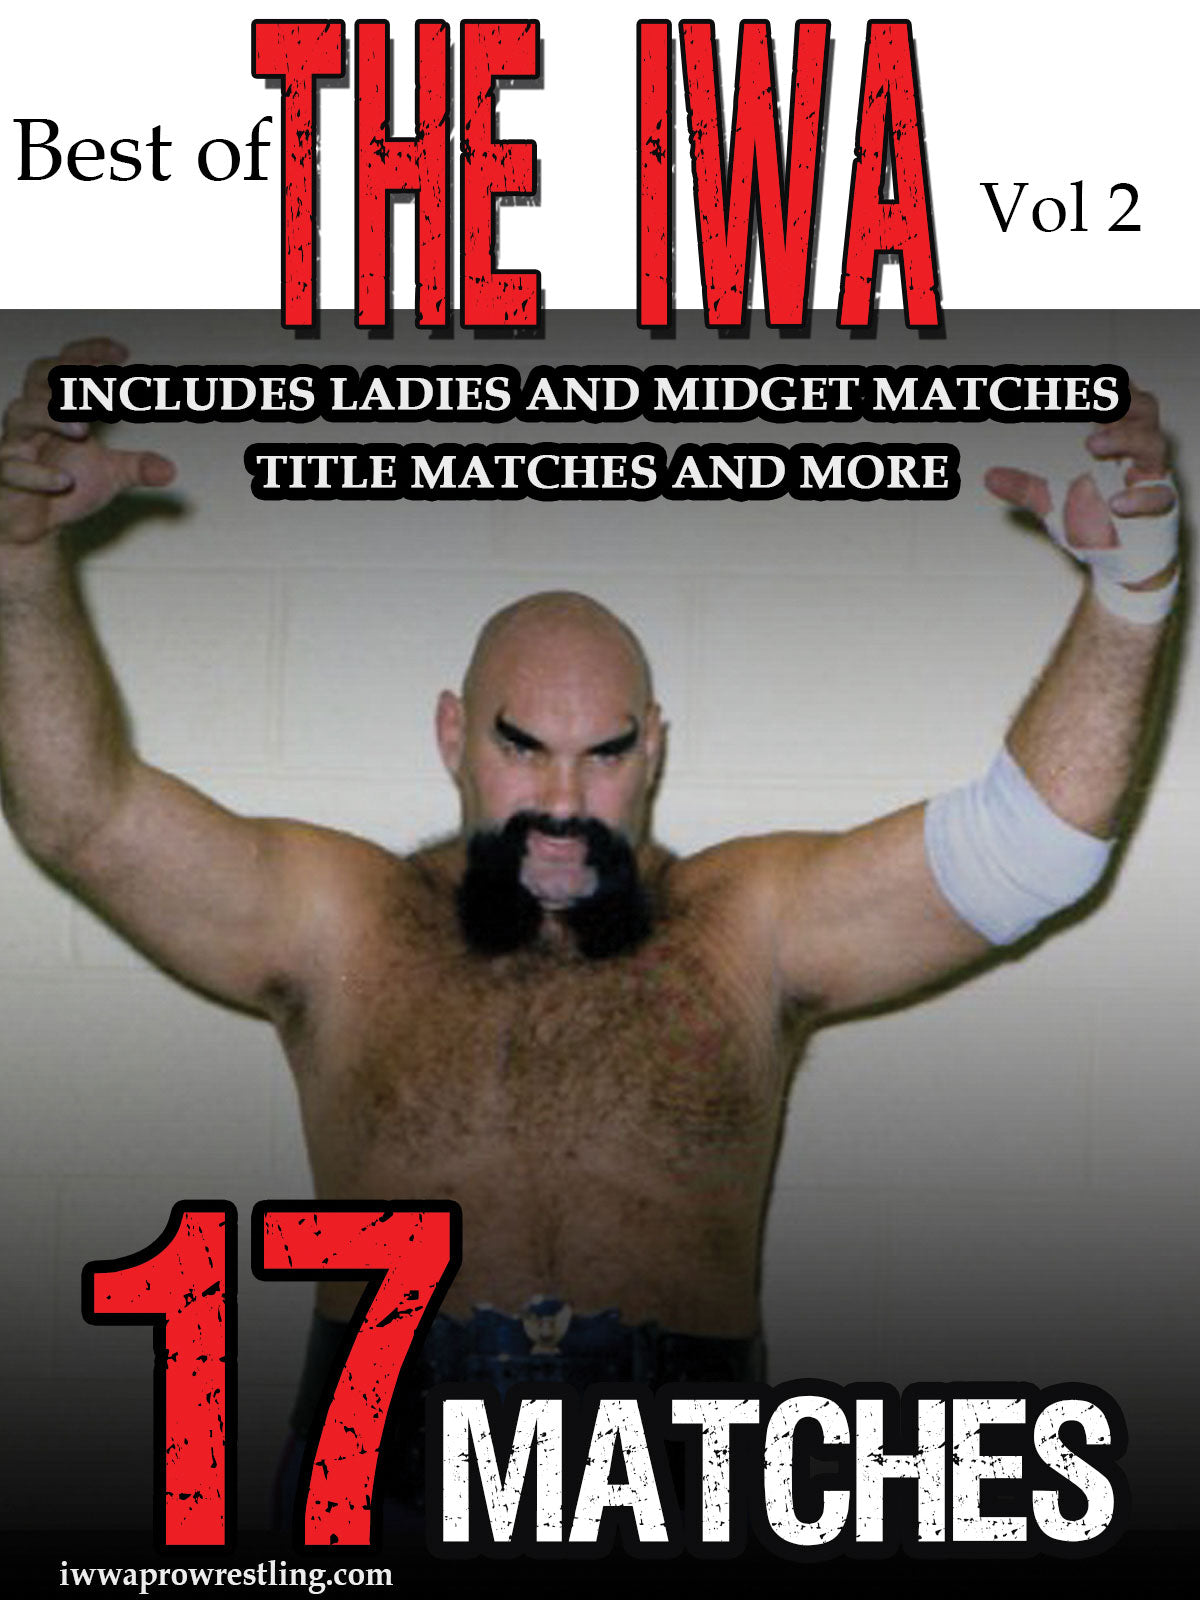 Best of the IWA: Vol. 2 - 17 Matches cover art